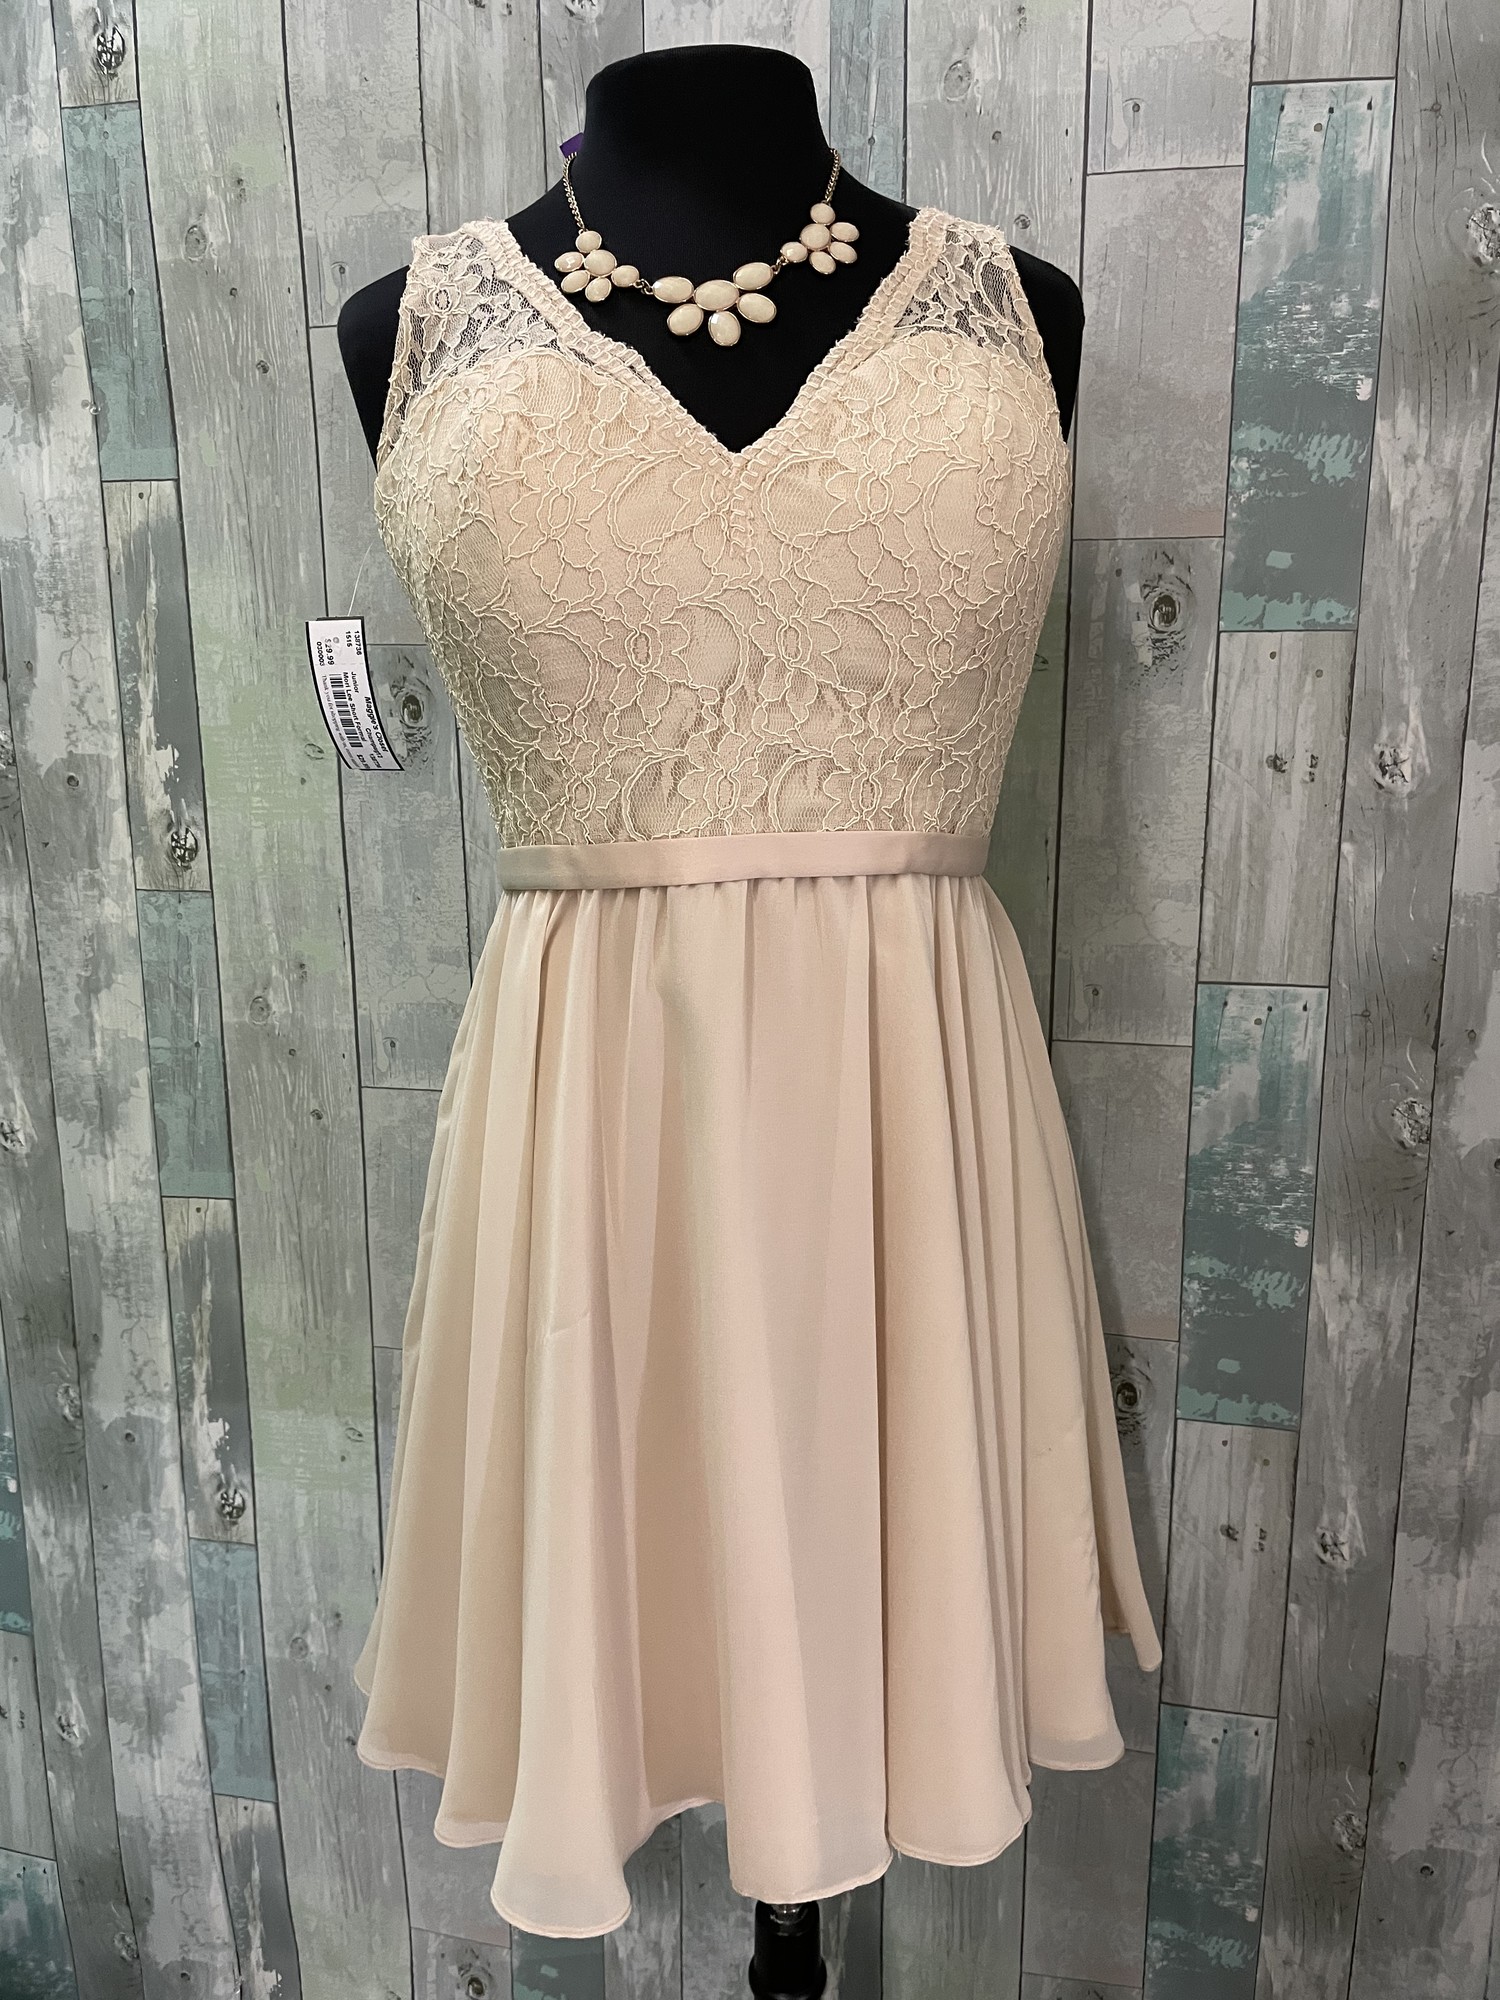 Mori Lee Short Formal,
Lace top, back zip closure
 Champage
Size: 12